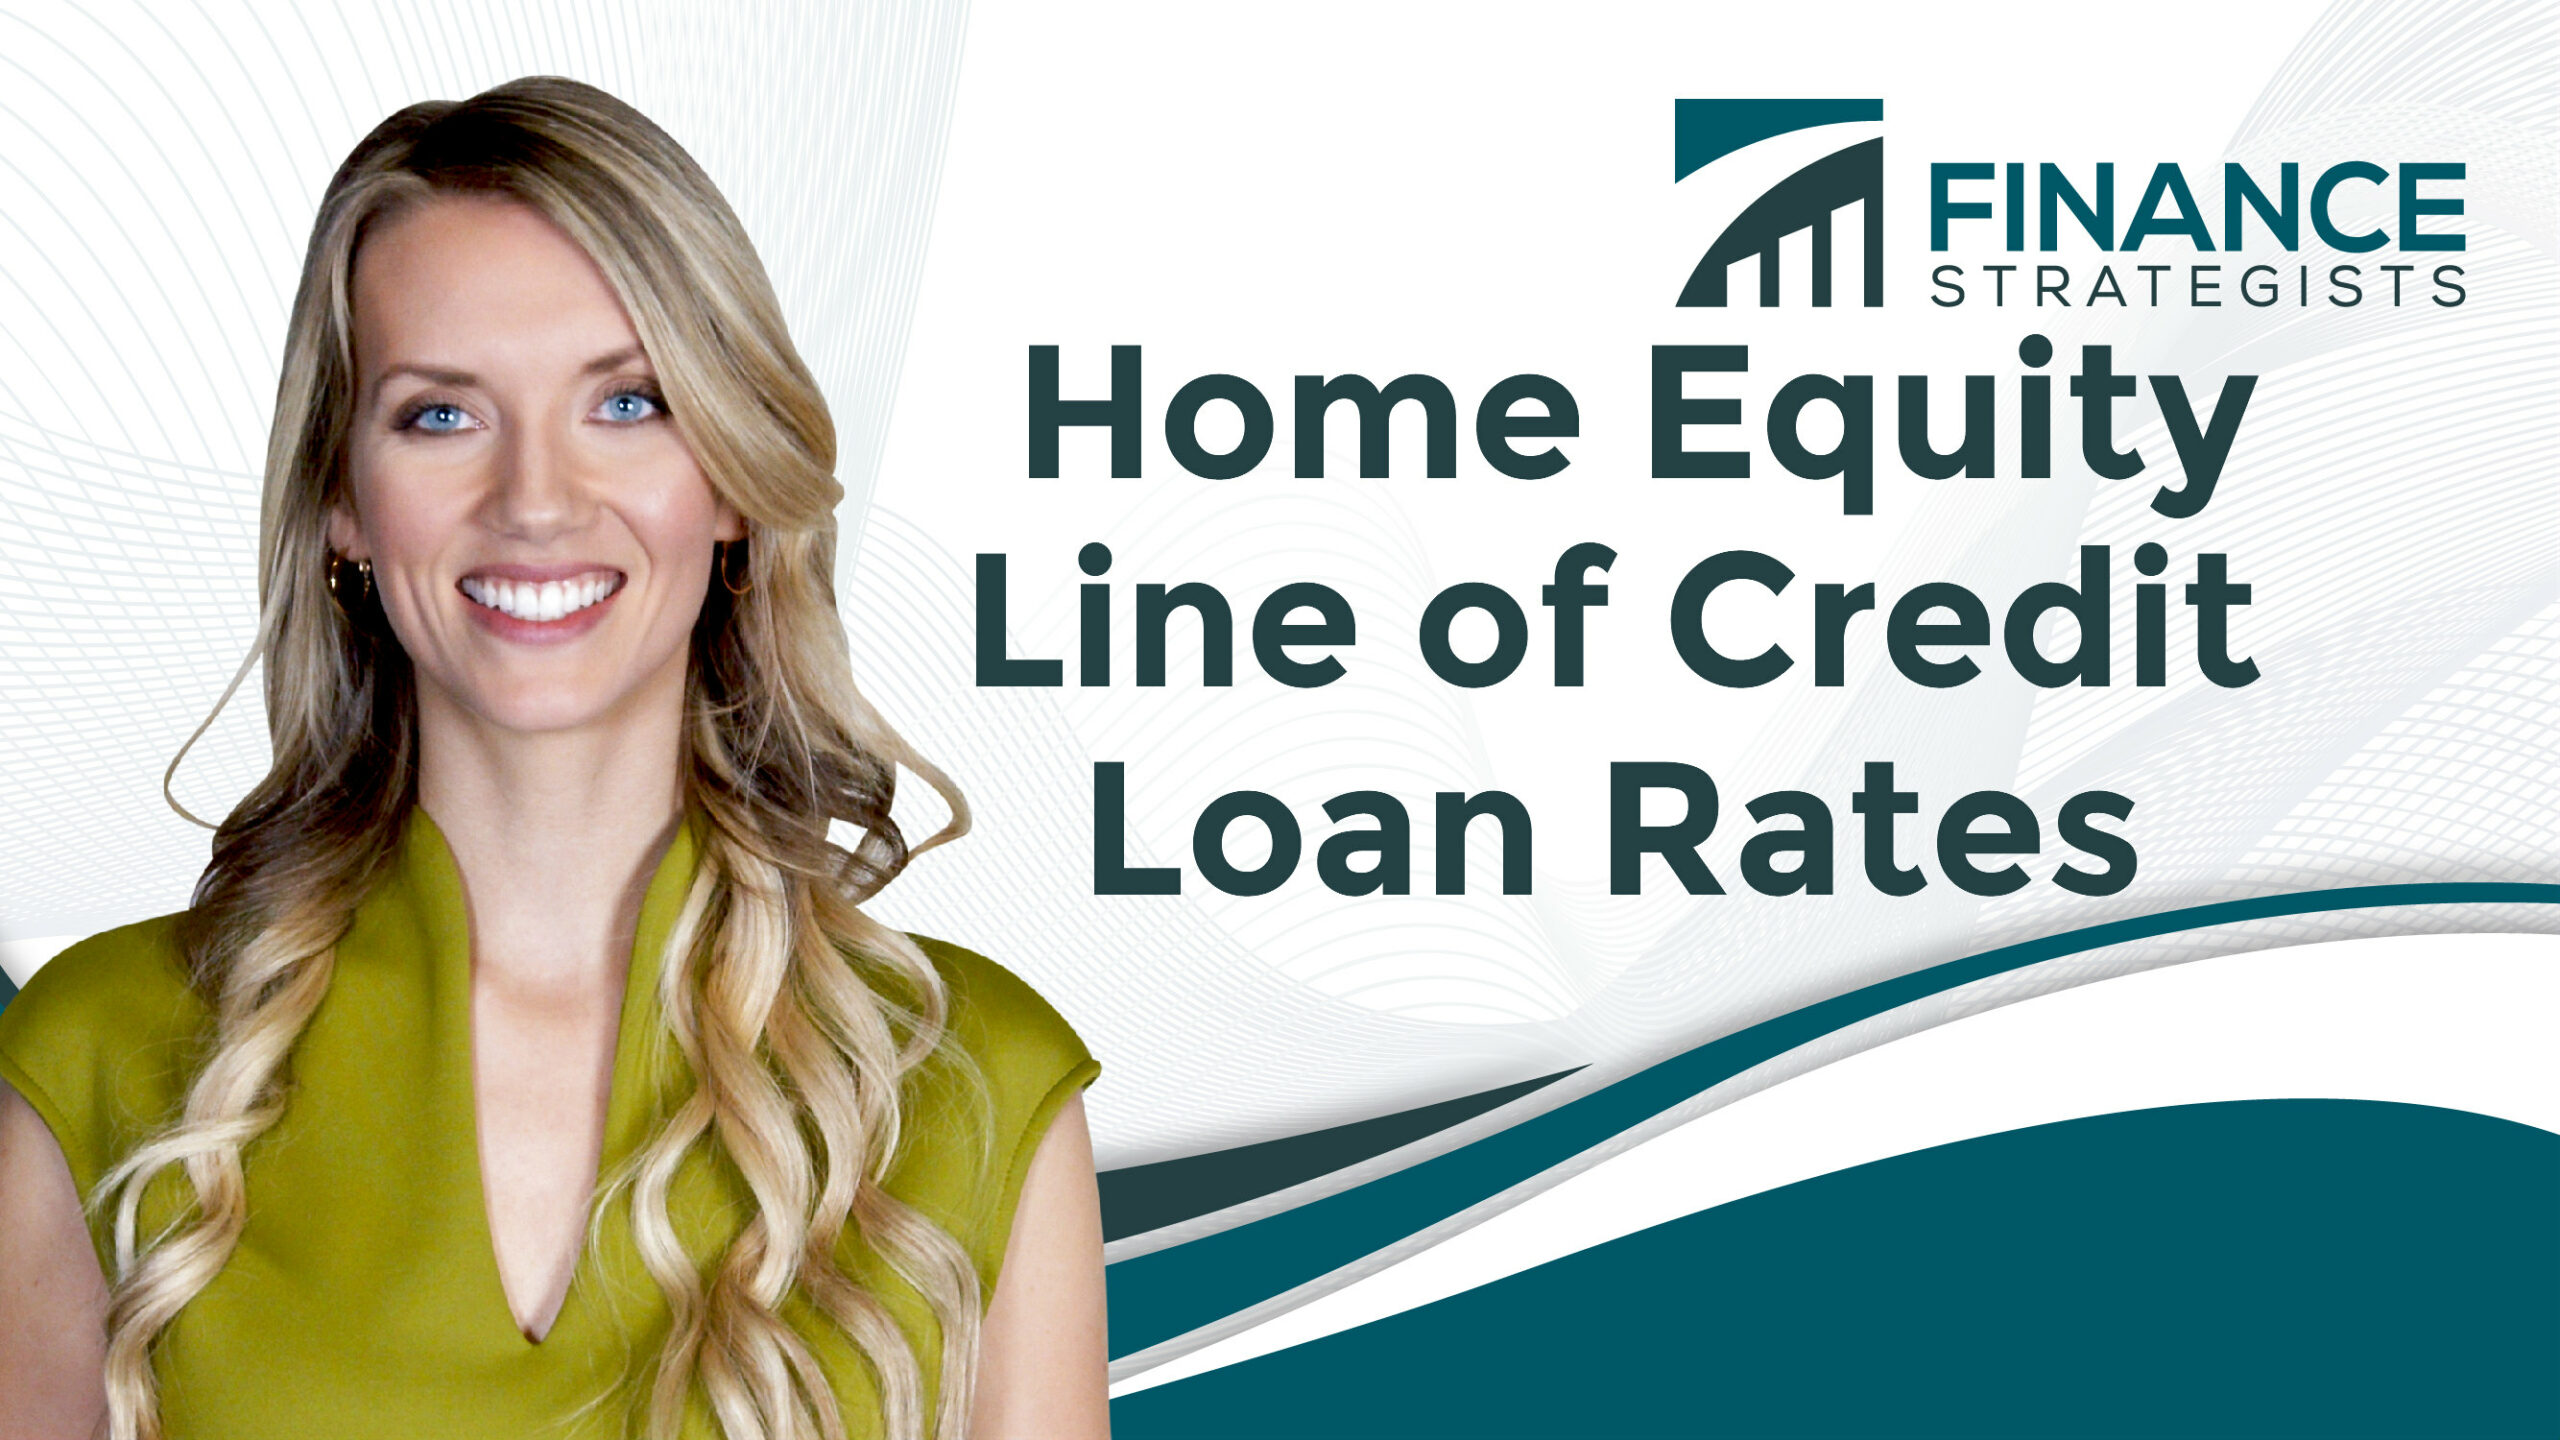 home-equity-line-of-credit-loan-rates-finance-strategists